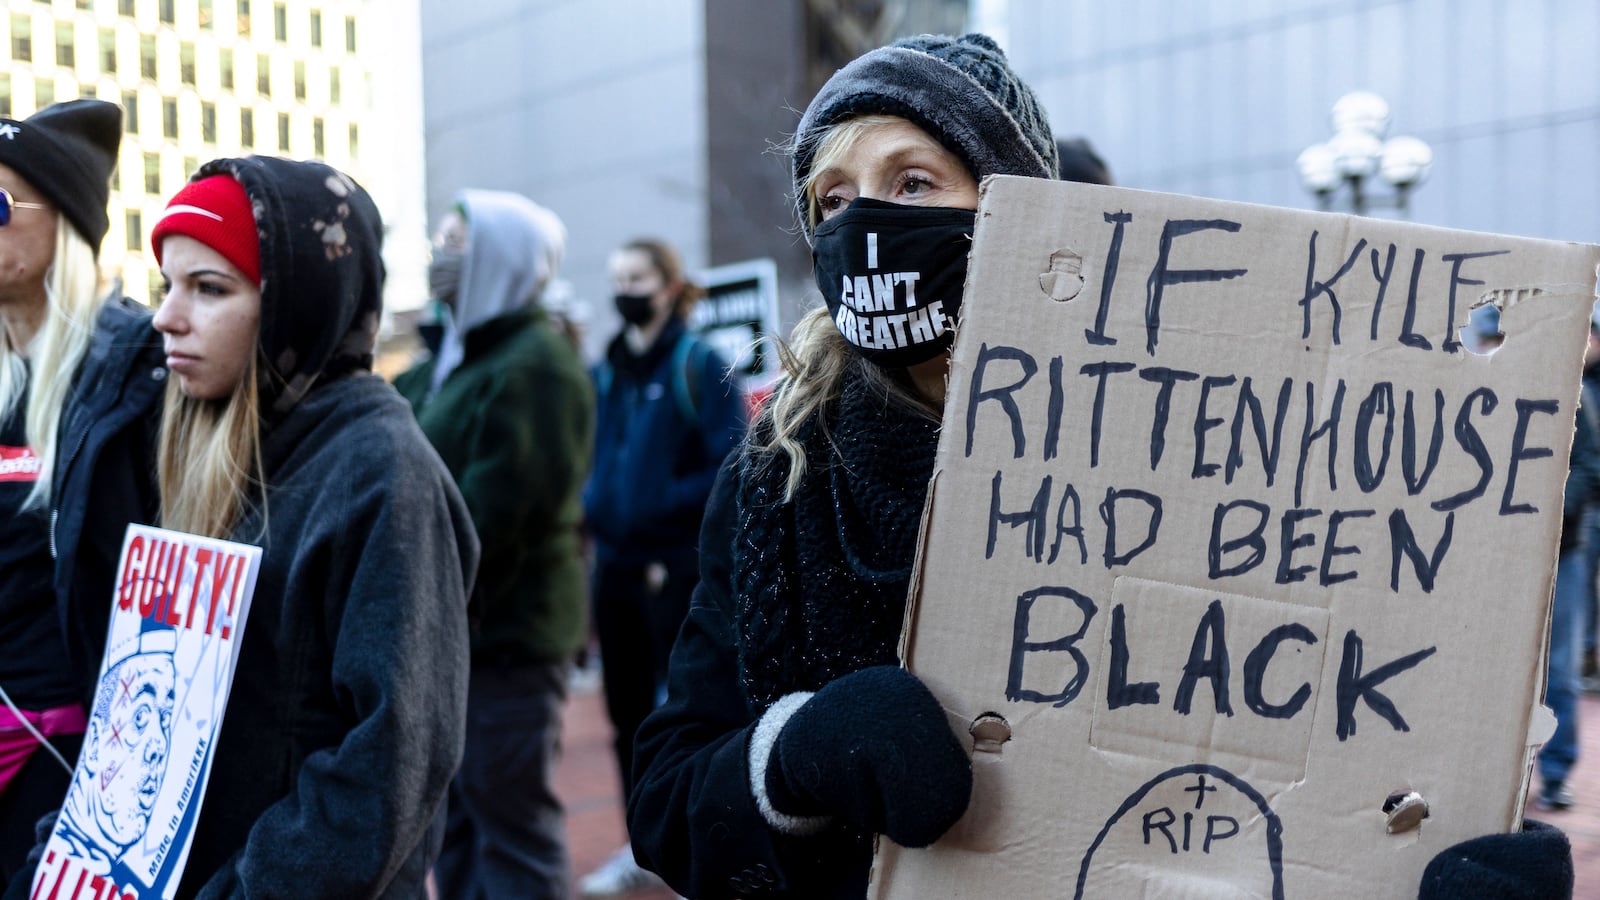 At a protest, a woman holds a sign that reads, “If Kyle Rittenhouse had been black,” with an illustration of a headstone that reads “RIP” at the top. She is also wearing a mask that reads, “I Can’t Breathe”.